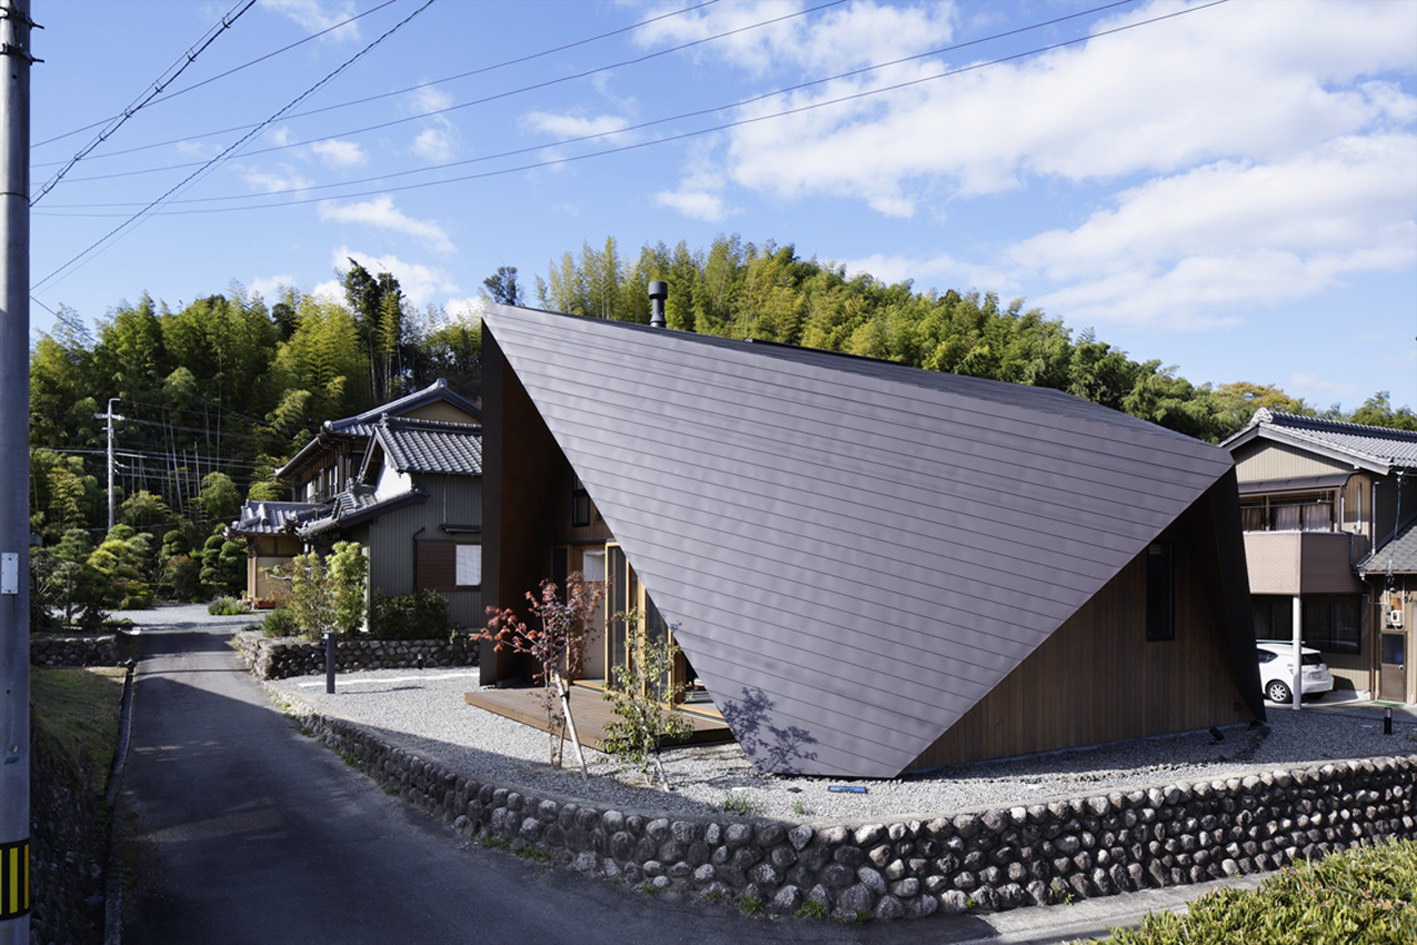 Origami House | Home with an Origami-Like Roof